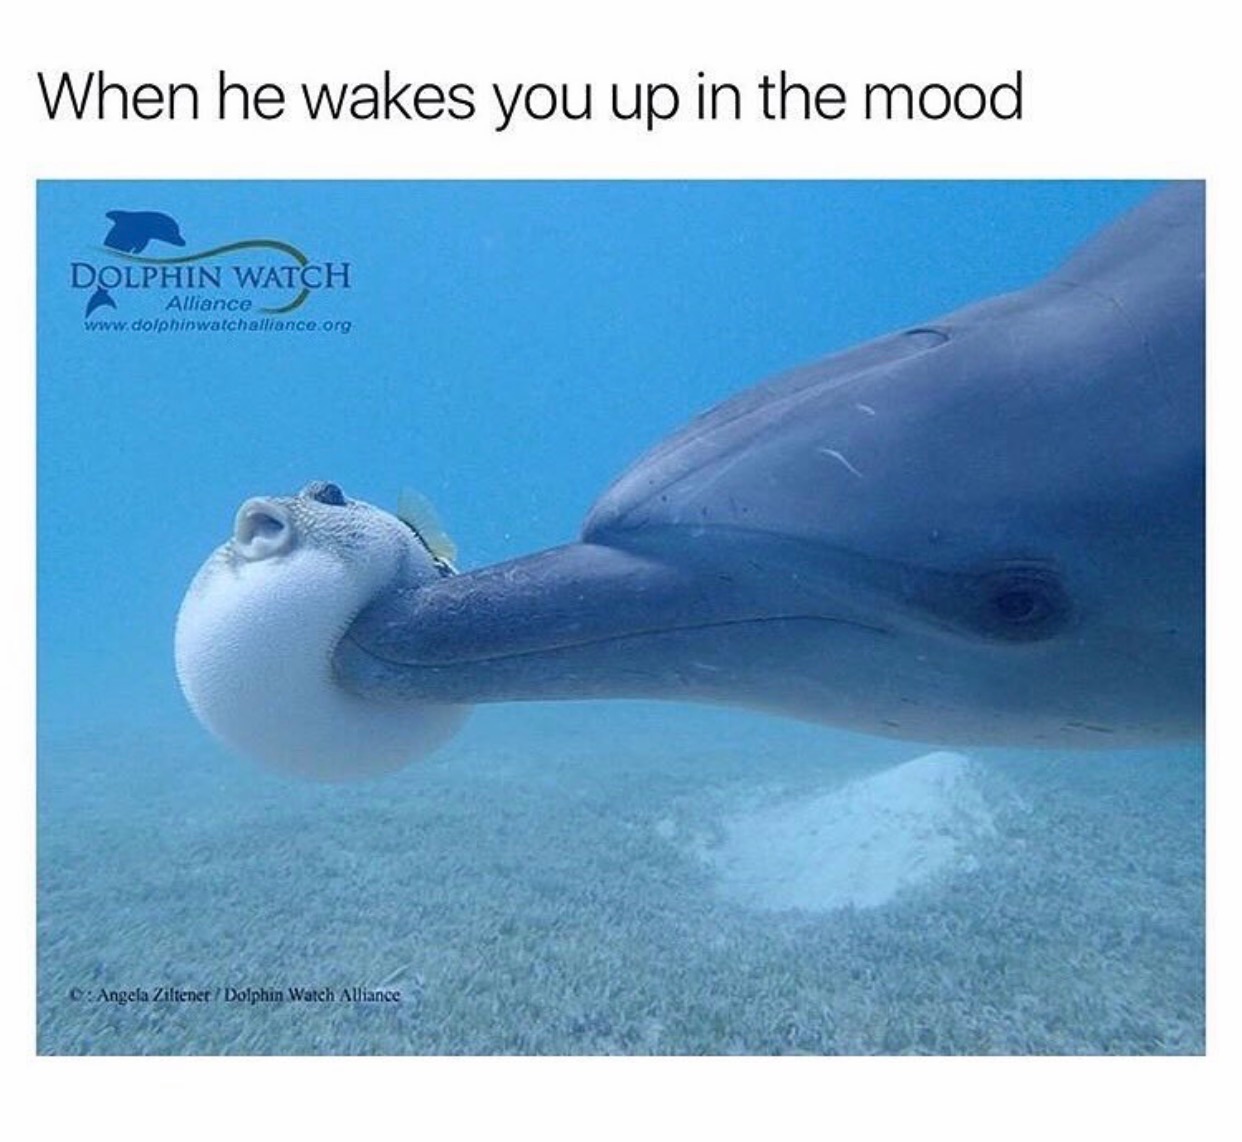 memes - boop meme dolphin - When he wakes you up in the mood Dolphin Watch Alliance Angela Ziltenet Dolphin Watch Alliance